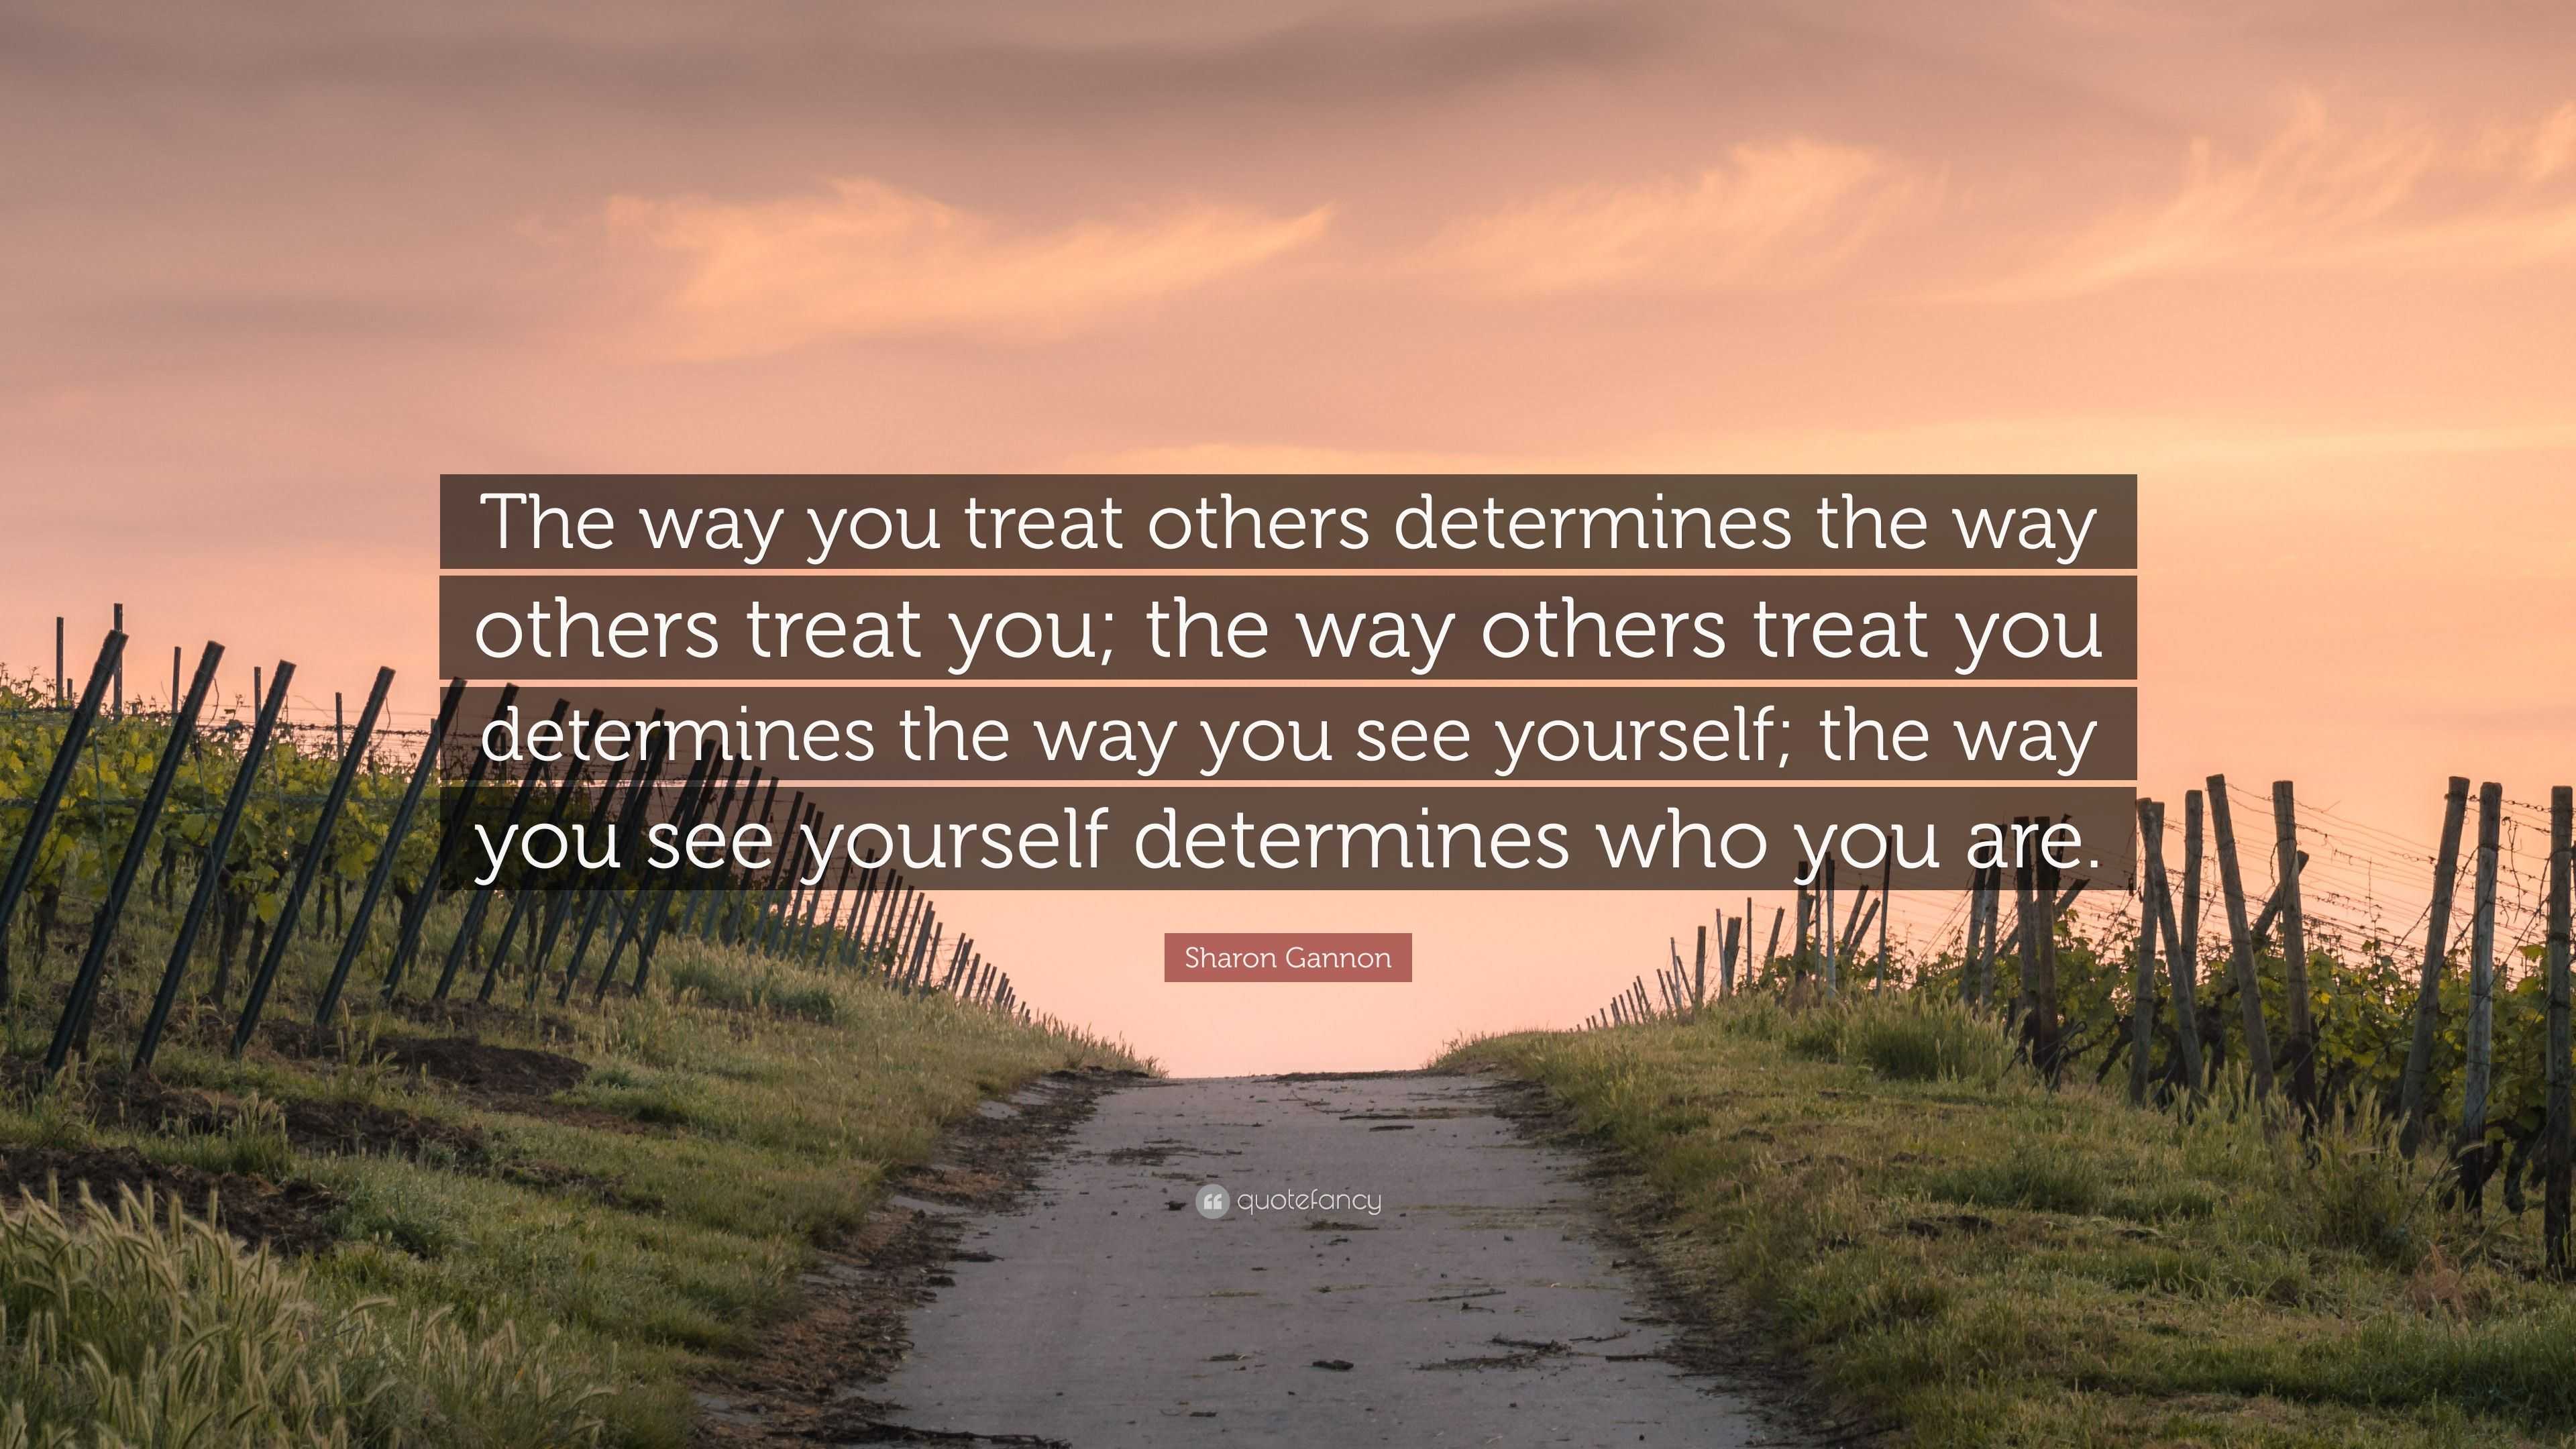 Sharon Gannon Quote “the Way You Treat Others Determines The Way Others Treat You The Way